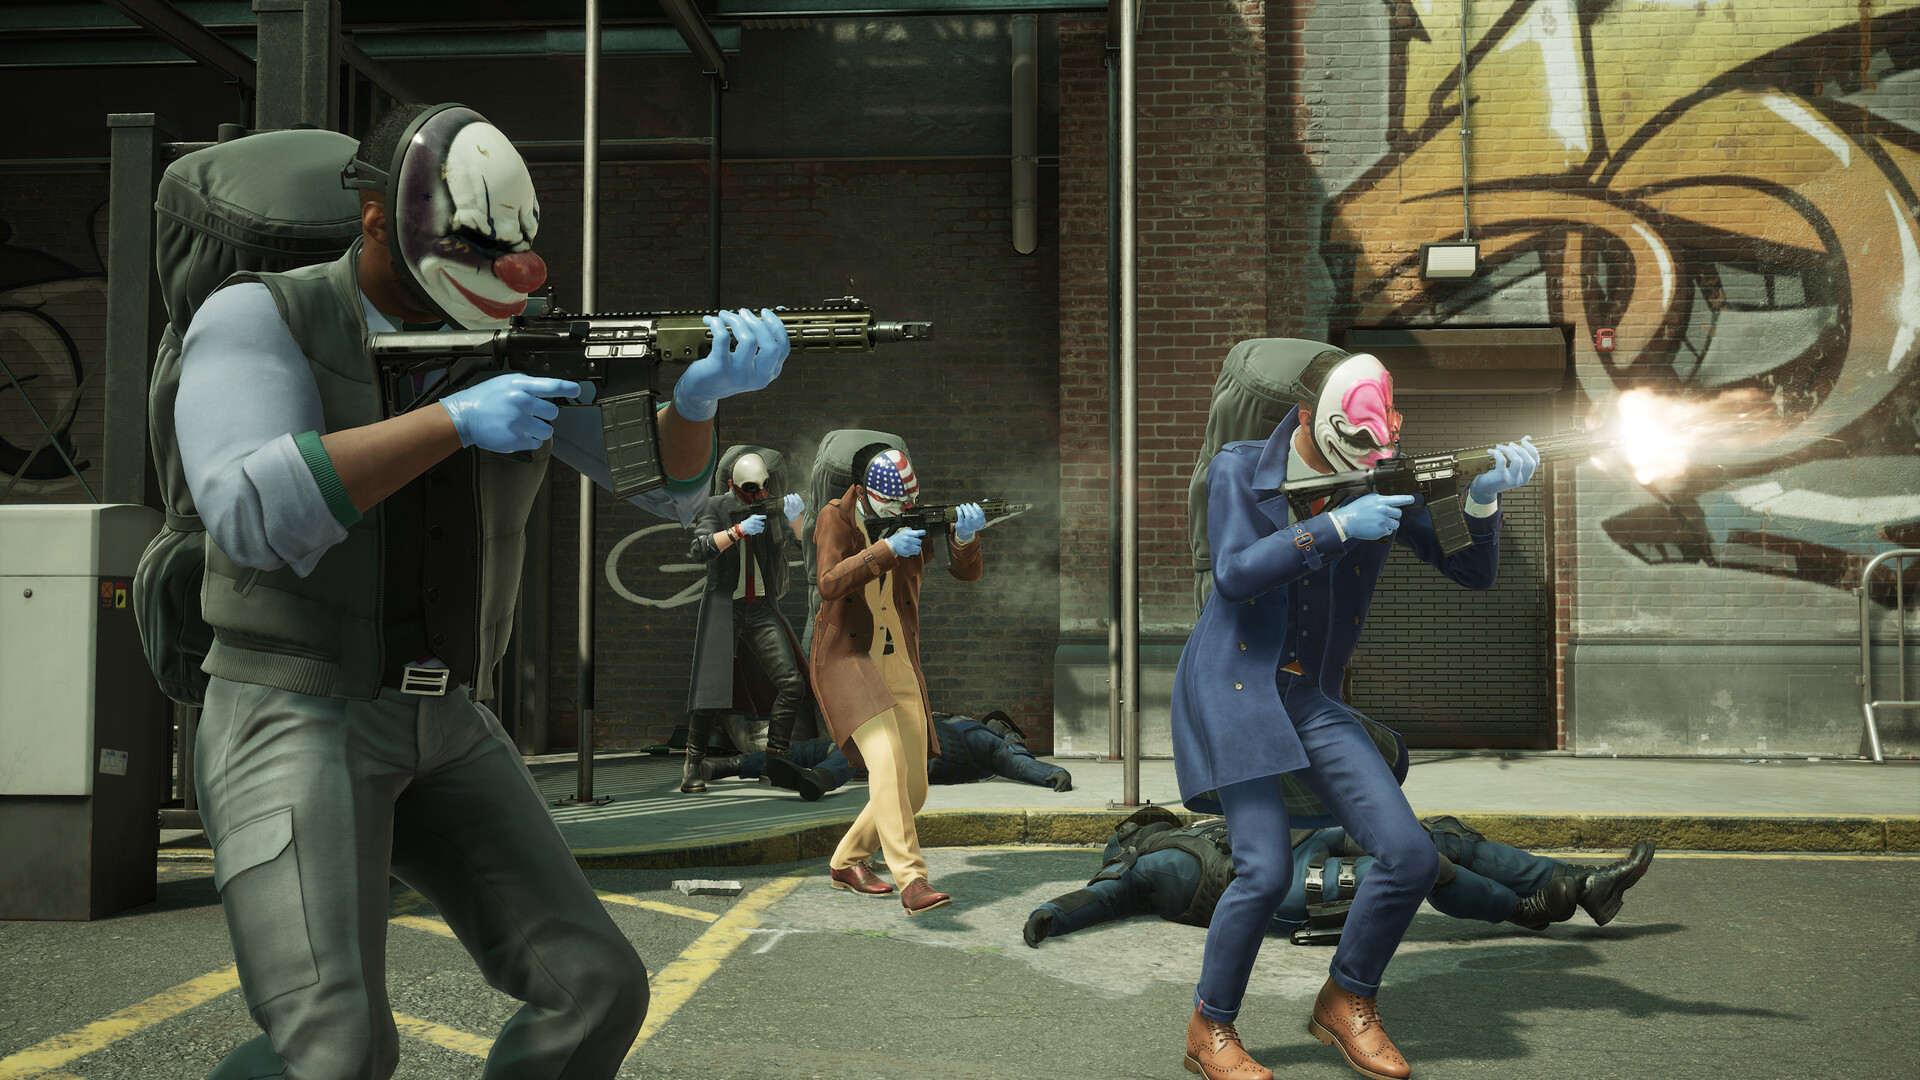 Payday 3 looks like a solid 4 play coop game! I've never played a payd